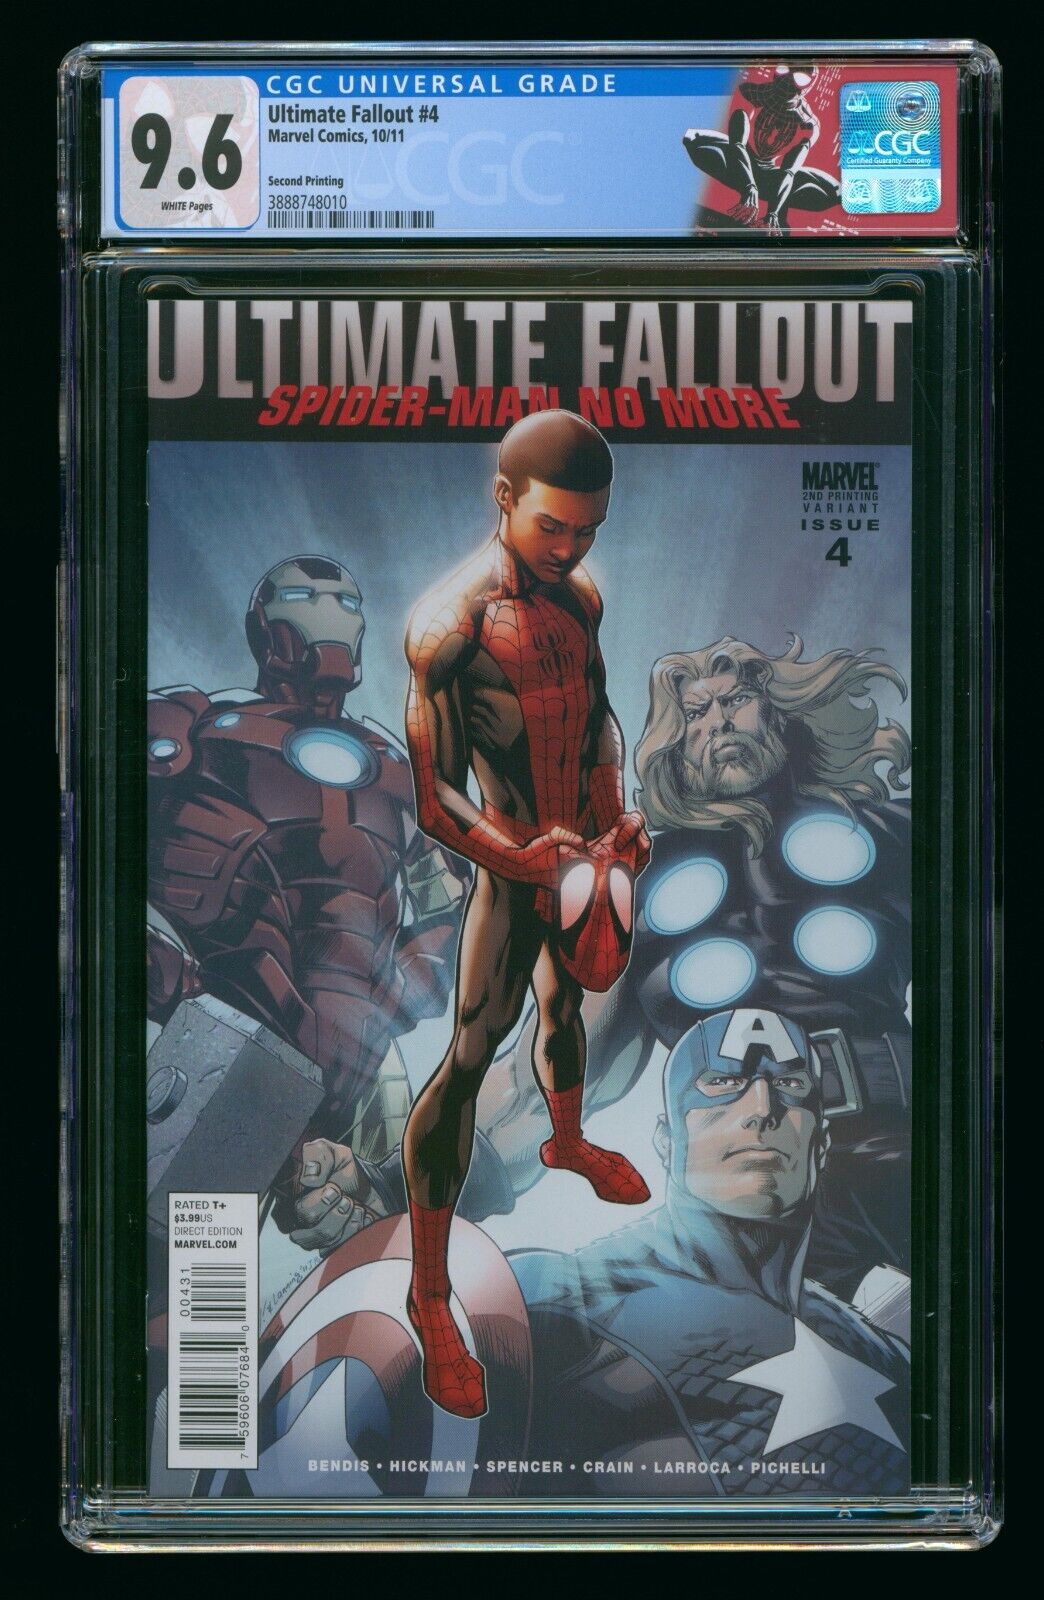 ULTIMTAE FALLOUT #4 (2011) CGC 9.6 1st MILE MORALES SPIDER-MAN 2nd PRINT